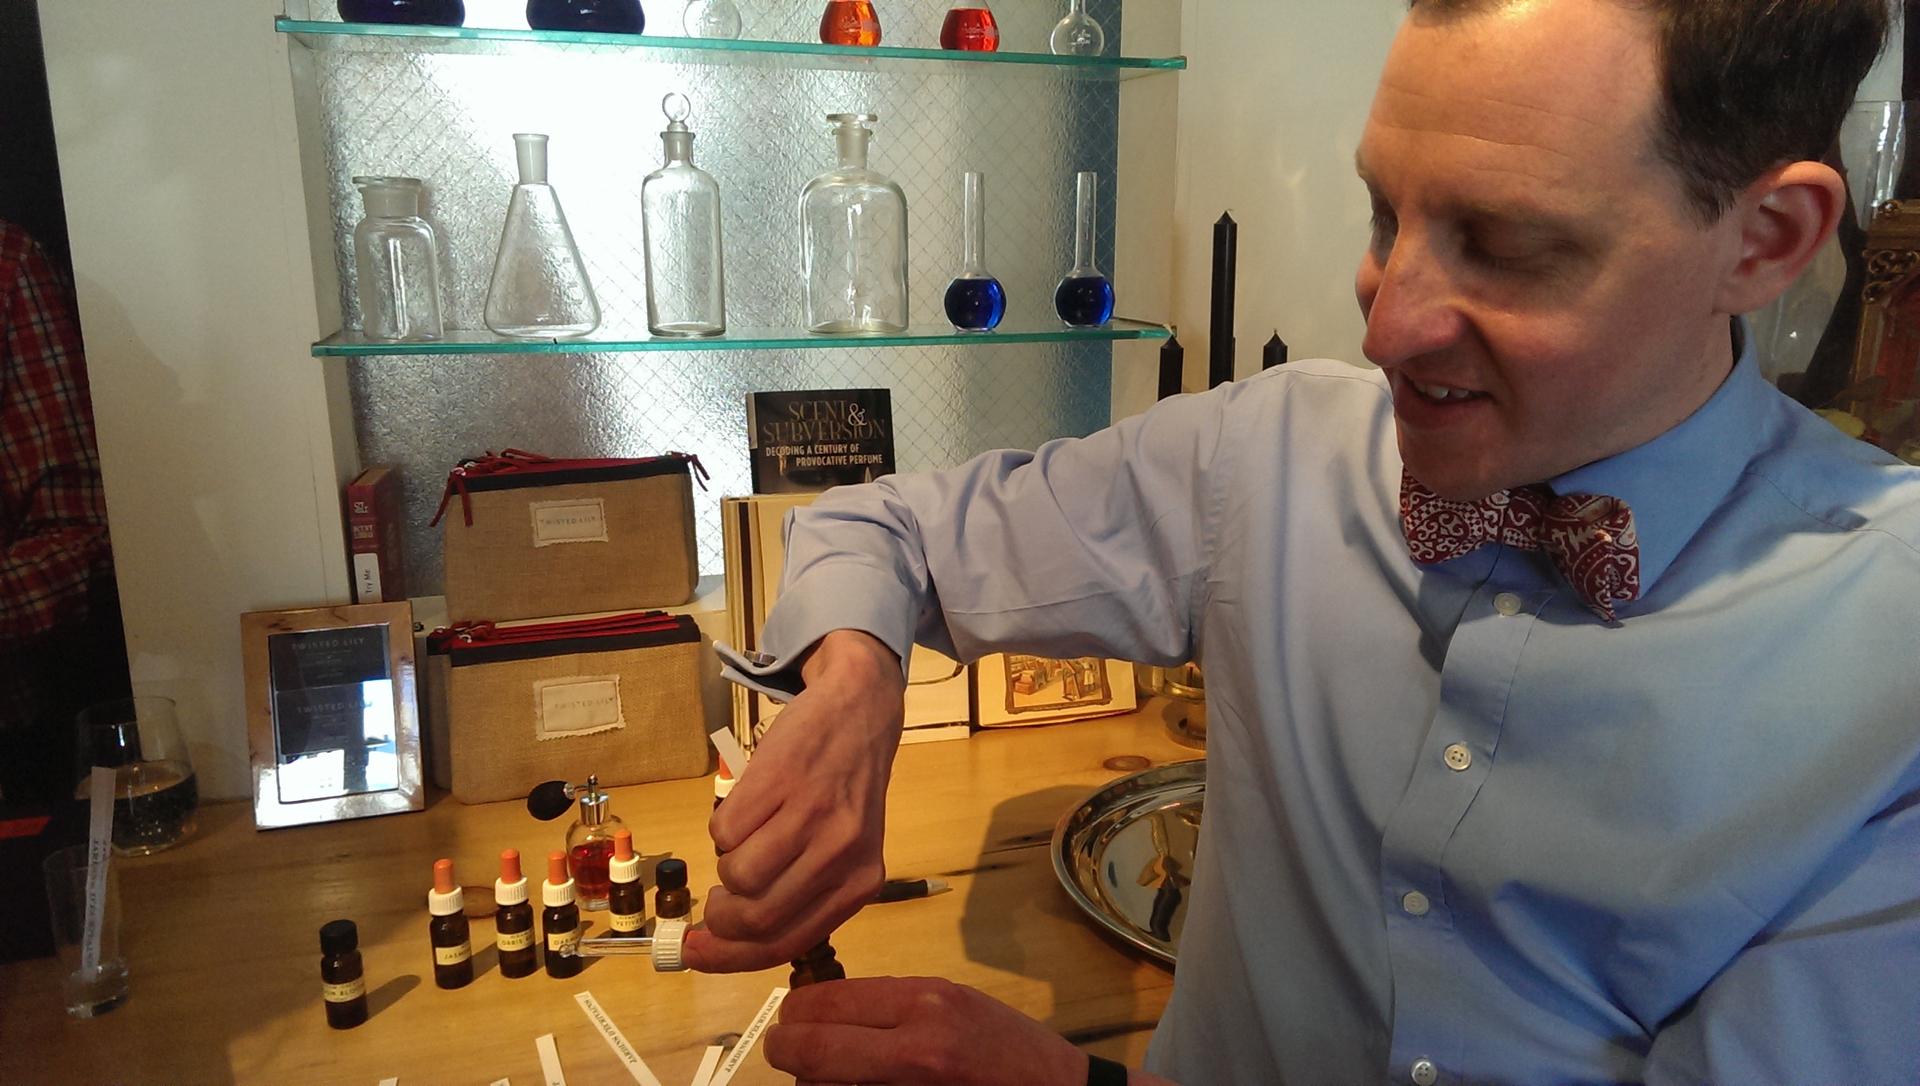 Hiram Green shows off some of the raw essences that go into his perfumes. He's at Twisted Lily, a fragrance boutique in Brooklyn.